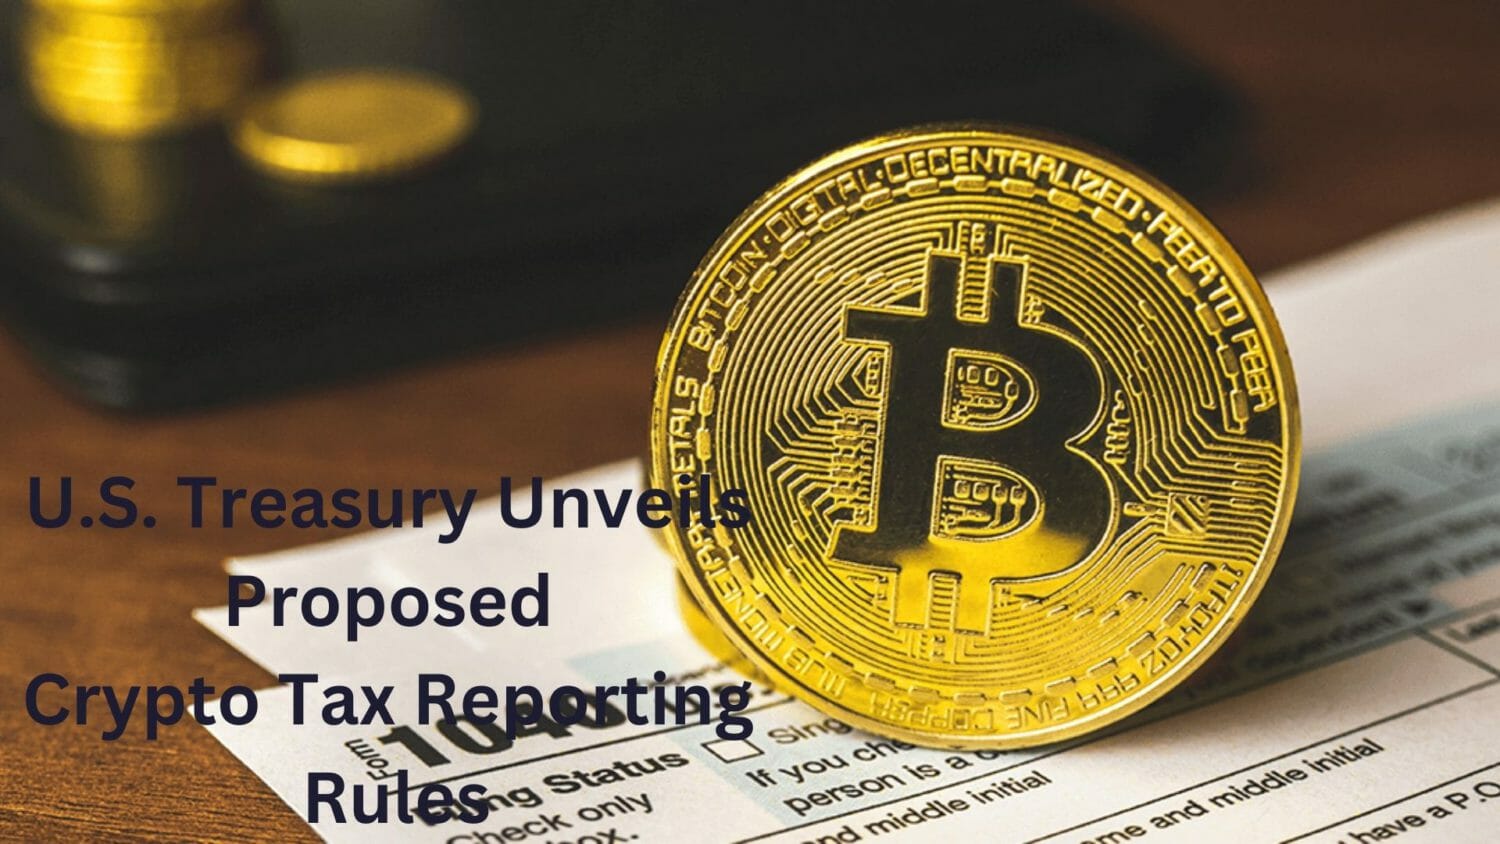 U.s. Treasury Unveils New Proposed Crypto Tax Reporting Rules